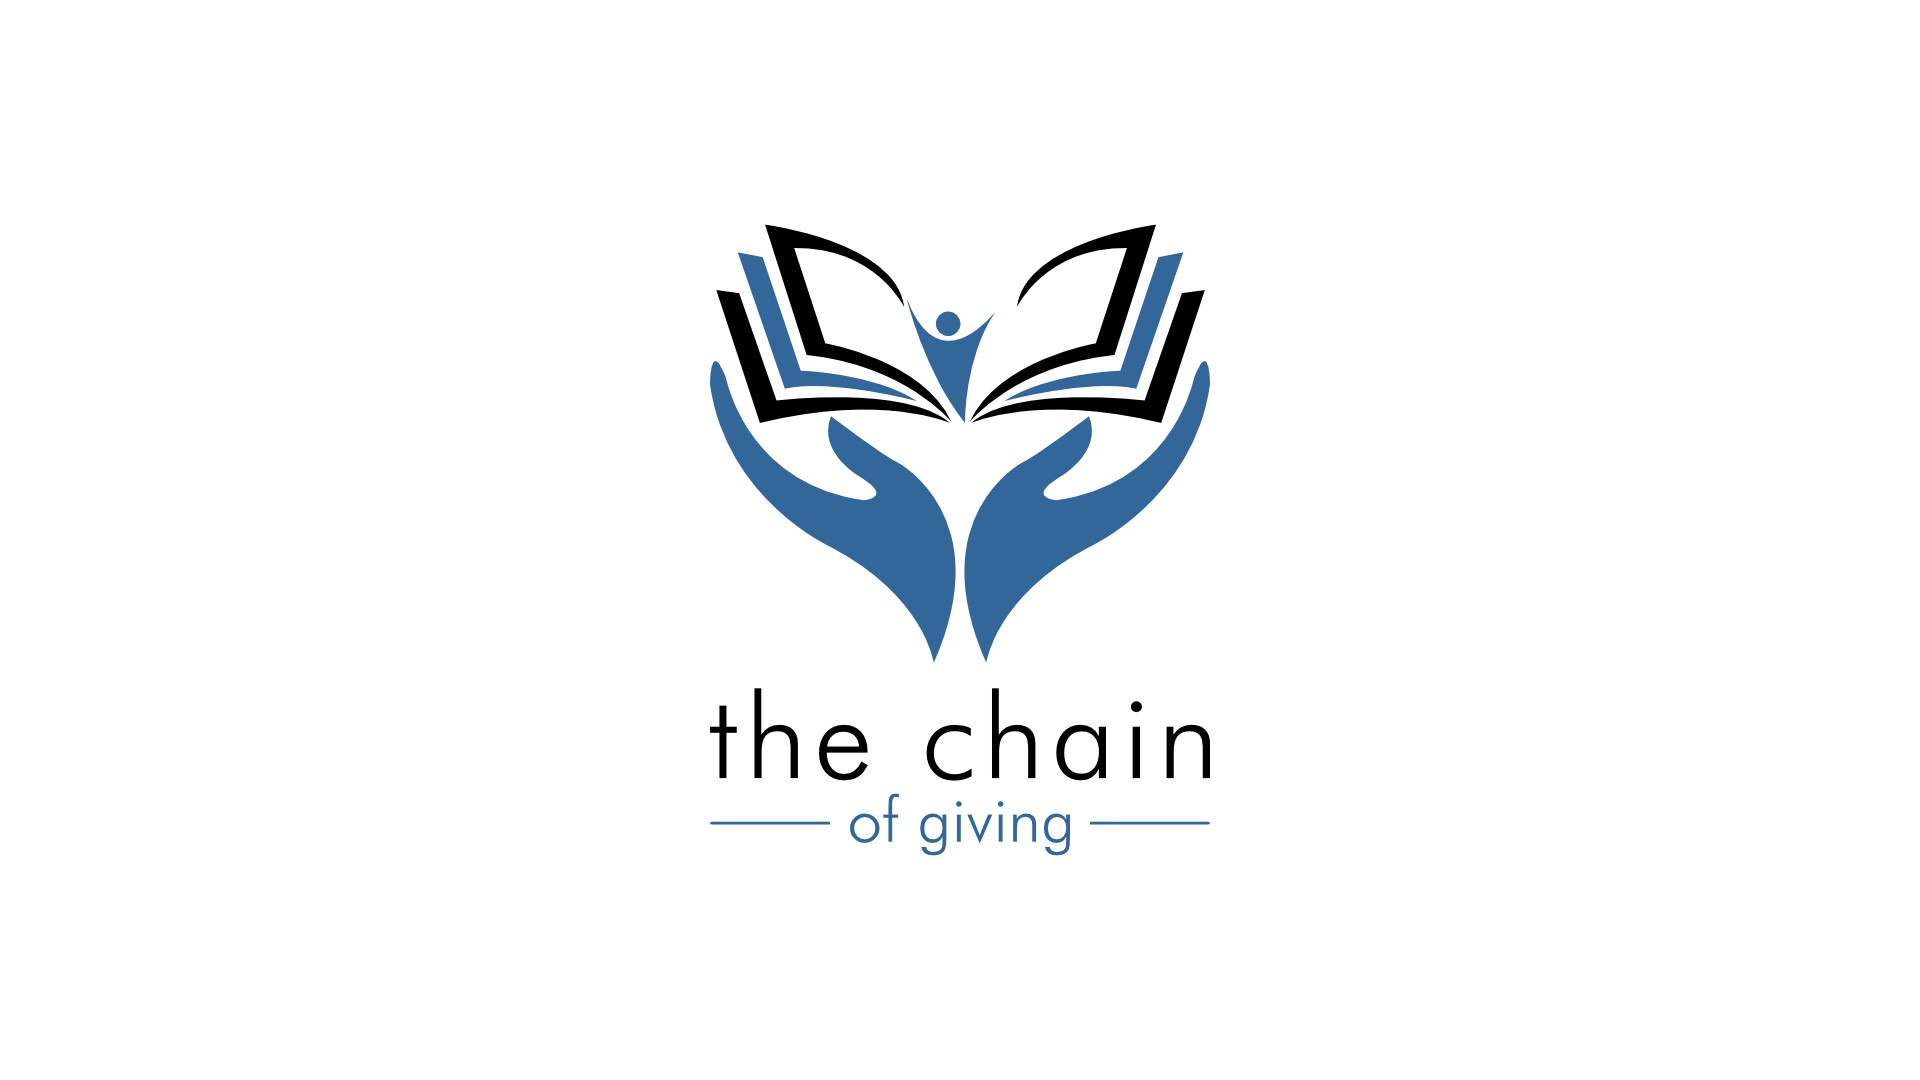 The Chain of Giving